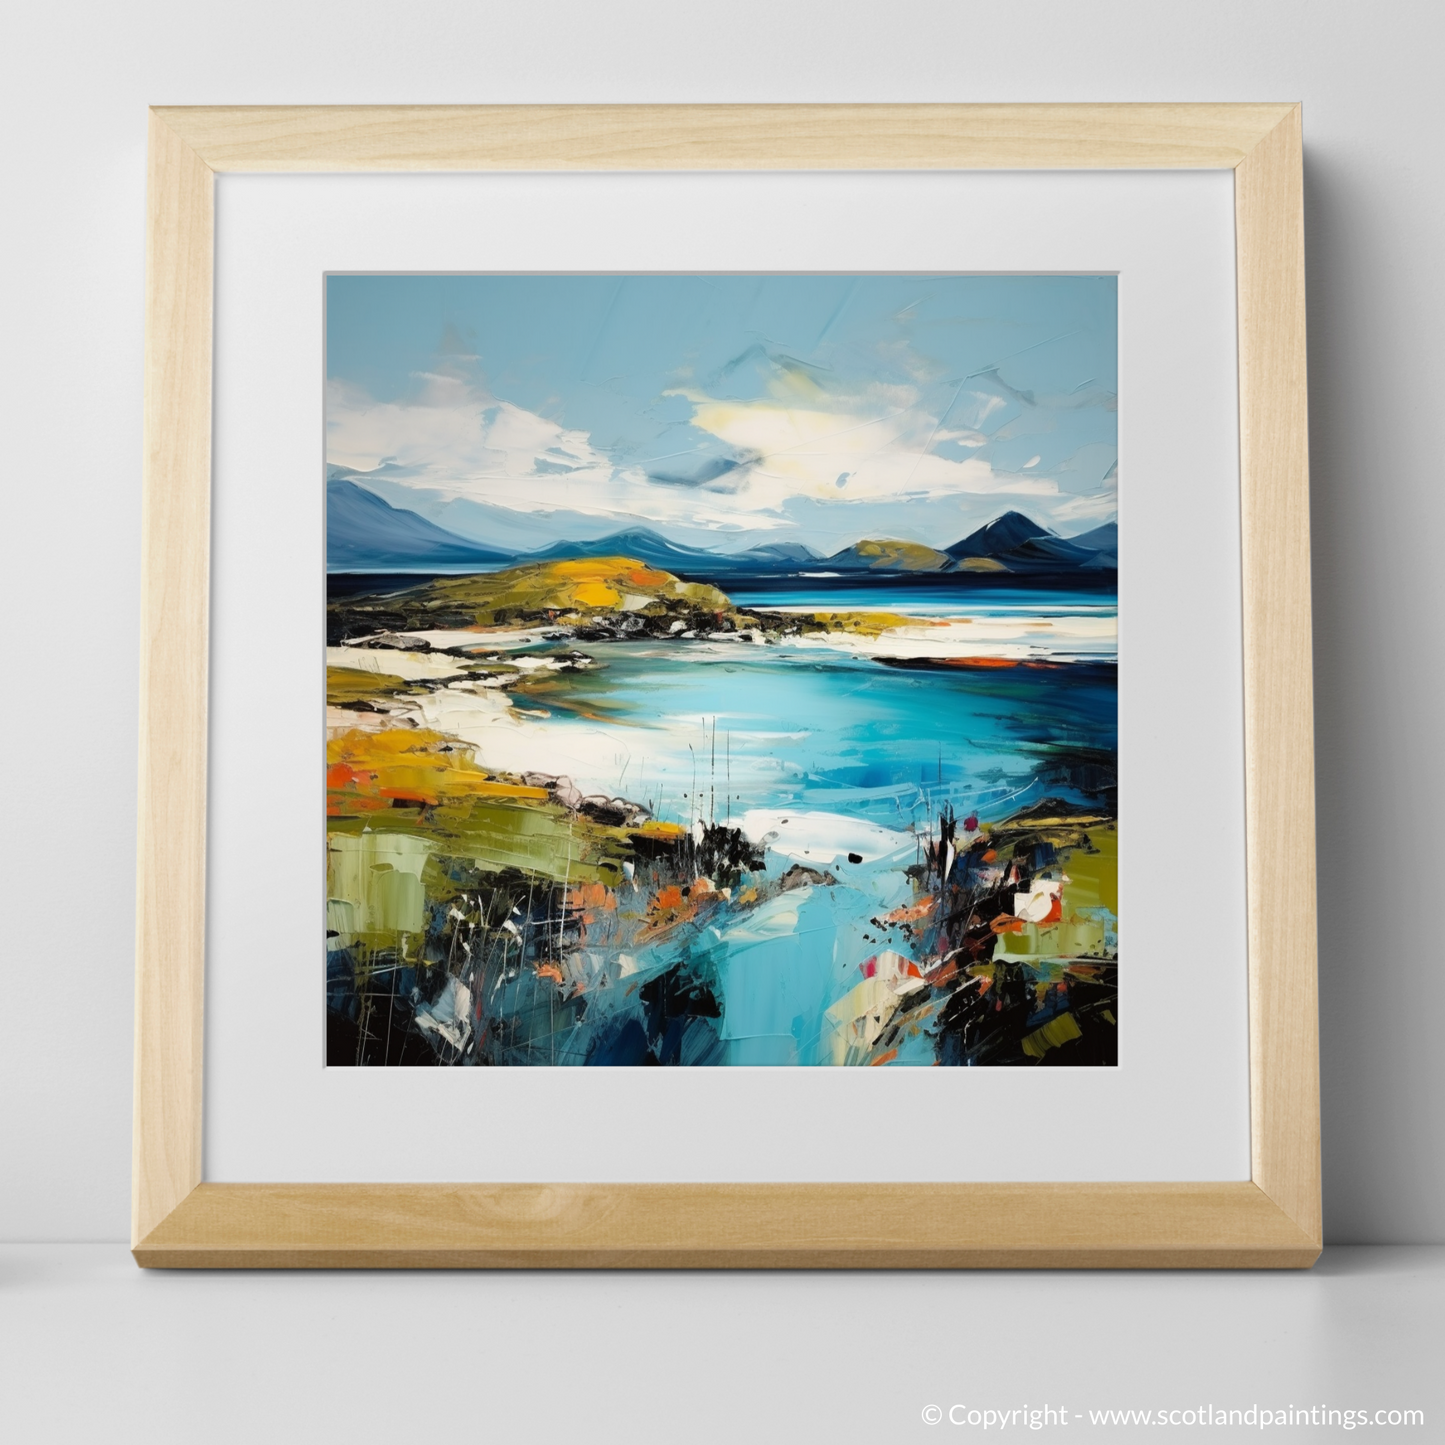 Art Print of Isle of Barra, Outer Hebrides with a natural frame